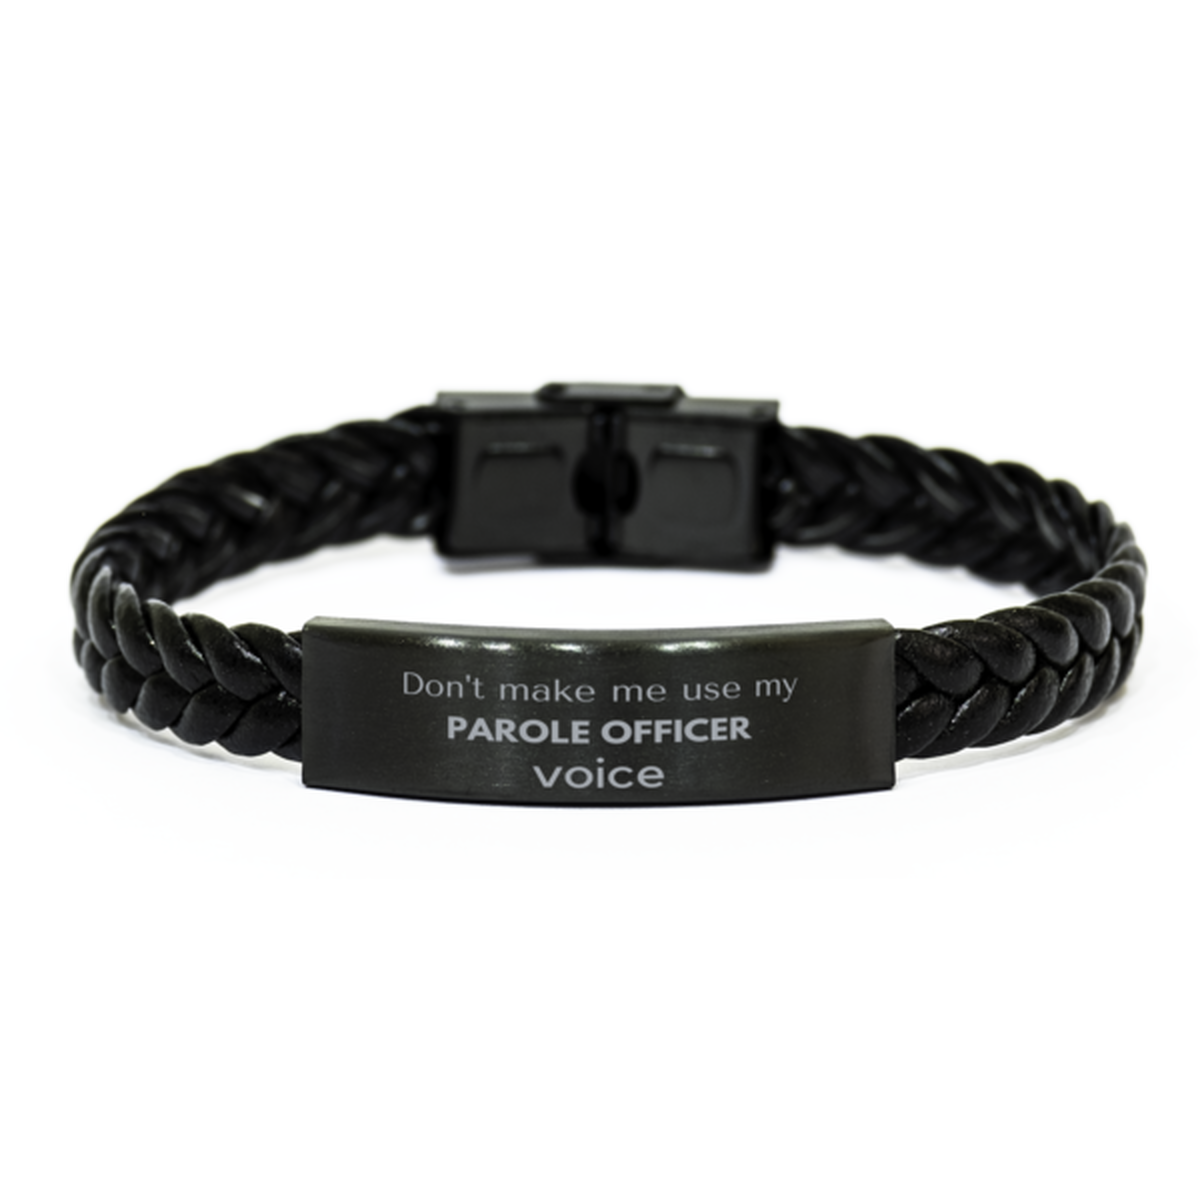 Don't make me use my Parole Officer voice, Sarcasm Parole Officer Gifts, Christmas Parole Officer Braided Leather Bracelet Birthday Unique Gifts For Parole Officer Coworkers, Men, Women, Colleague, Friends